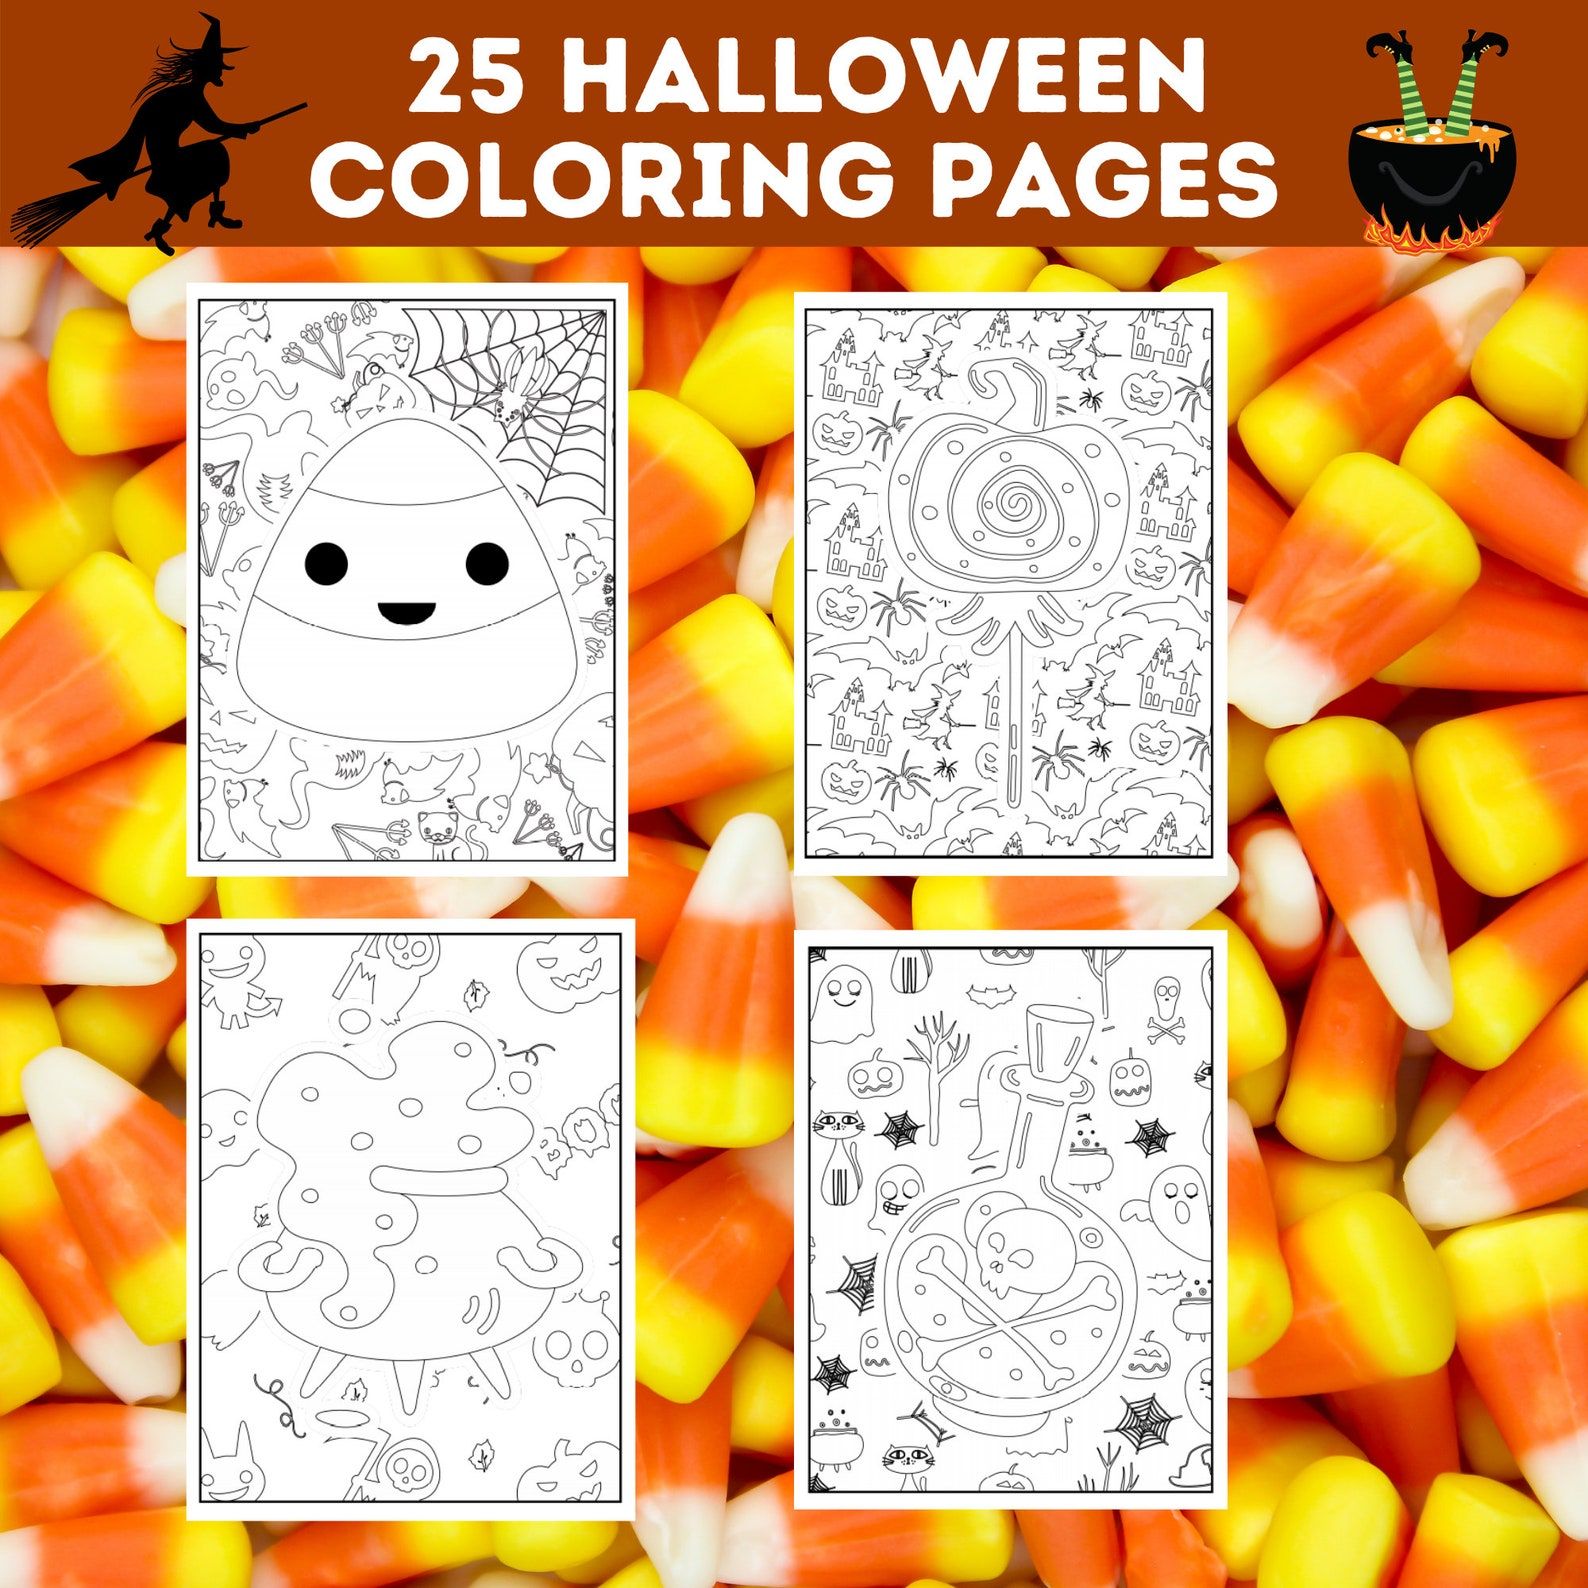 Candy corn and witch's pot coloring pages